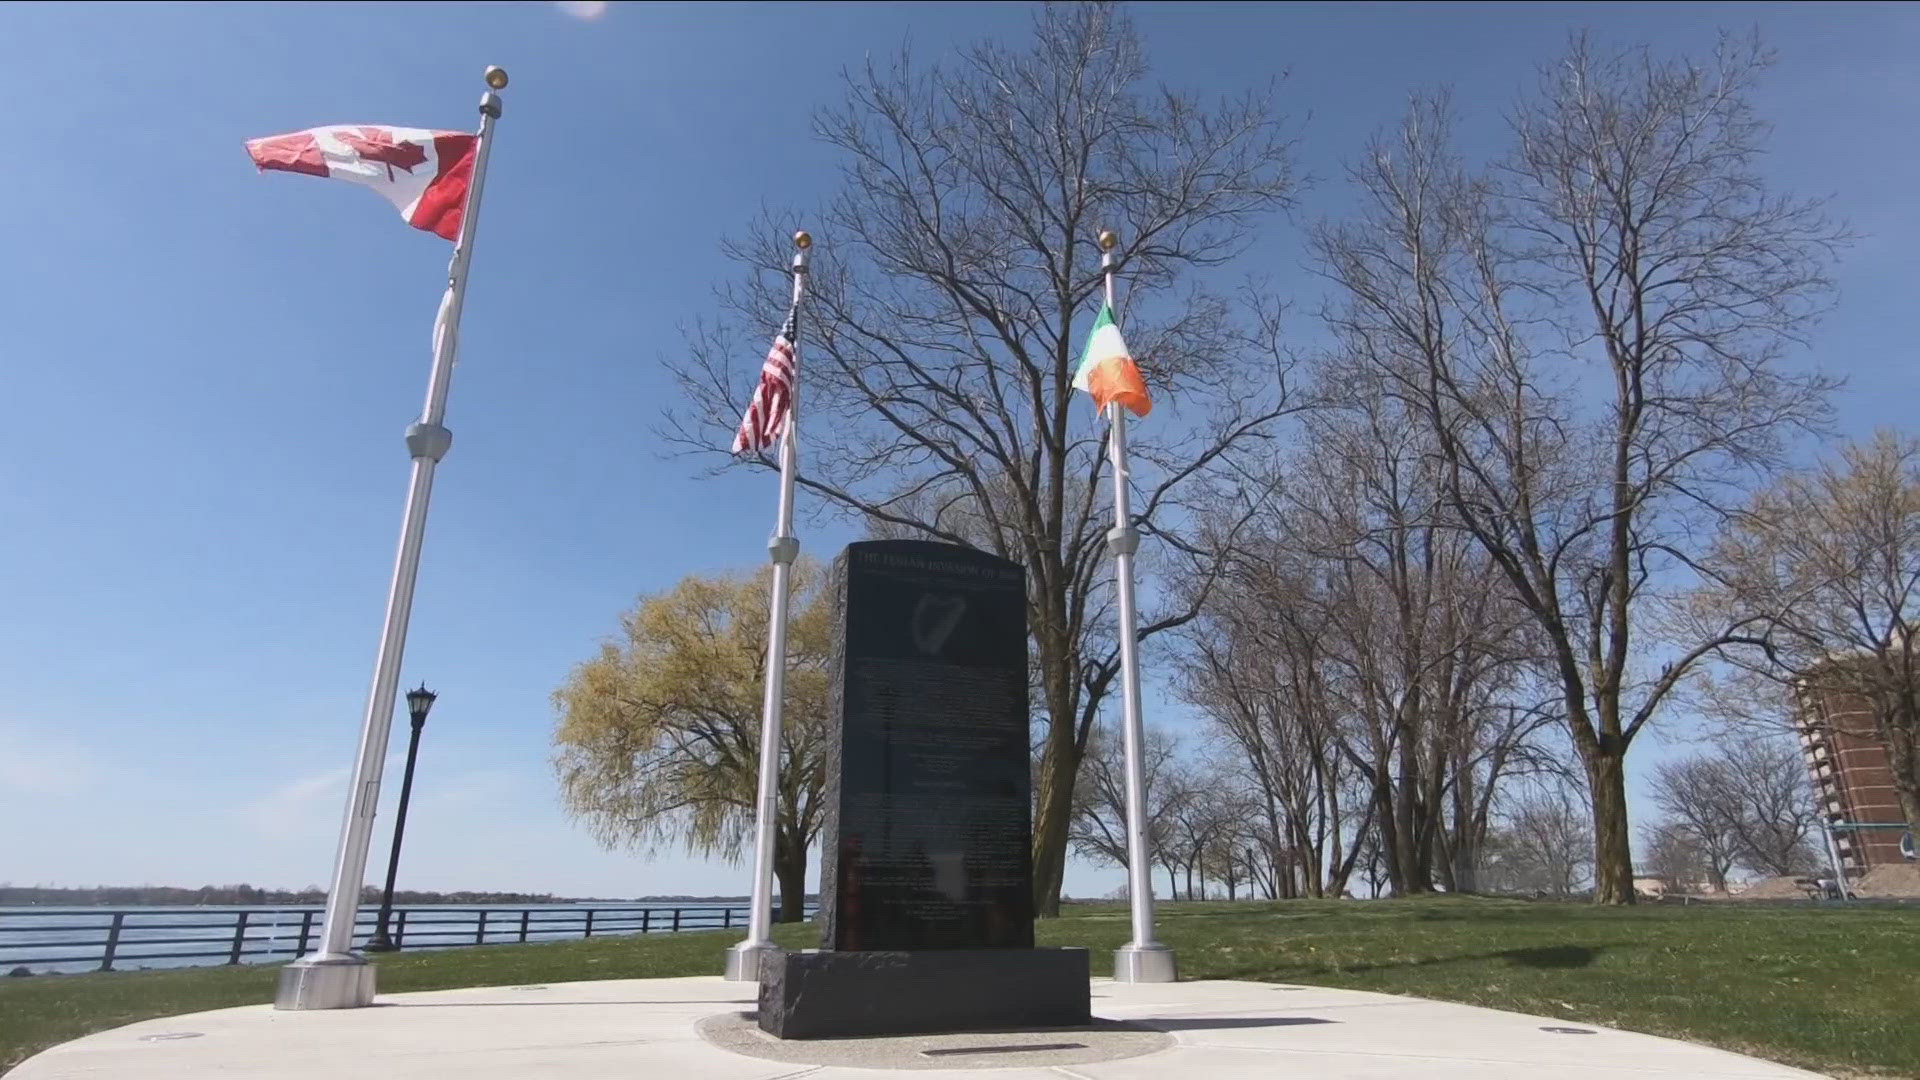 THE PROJECT SERVES AS A TRIBUTE TO THE REGION'S IRISH AMERICAN HISTORY.